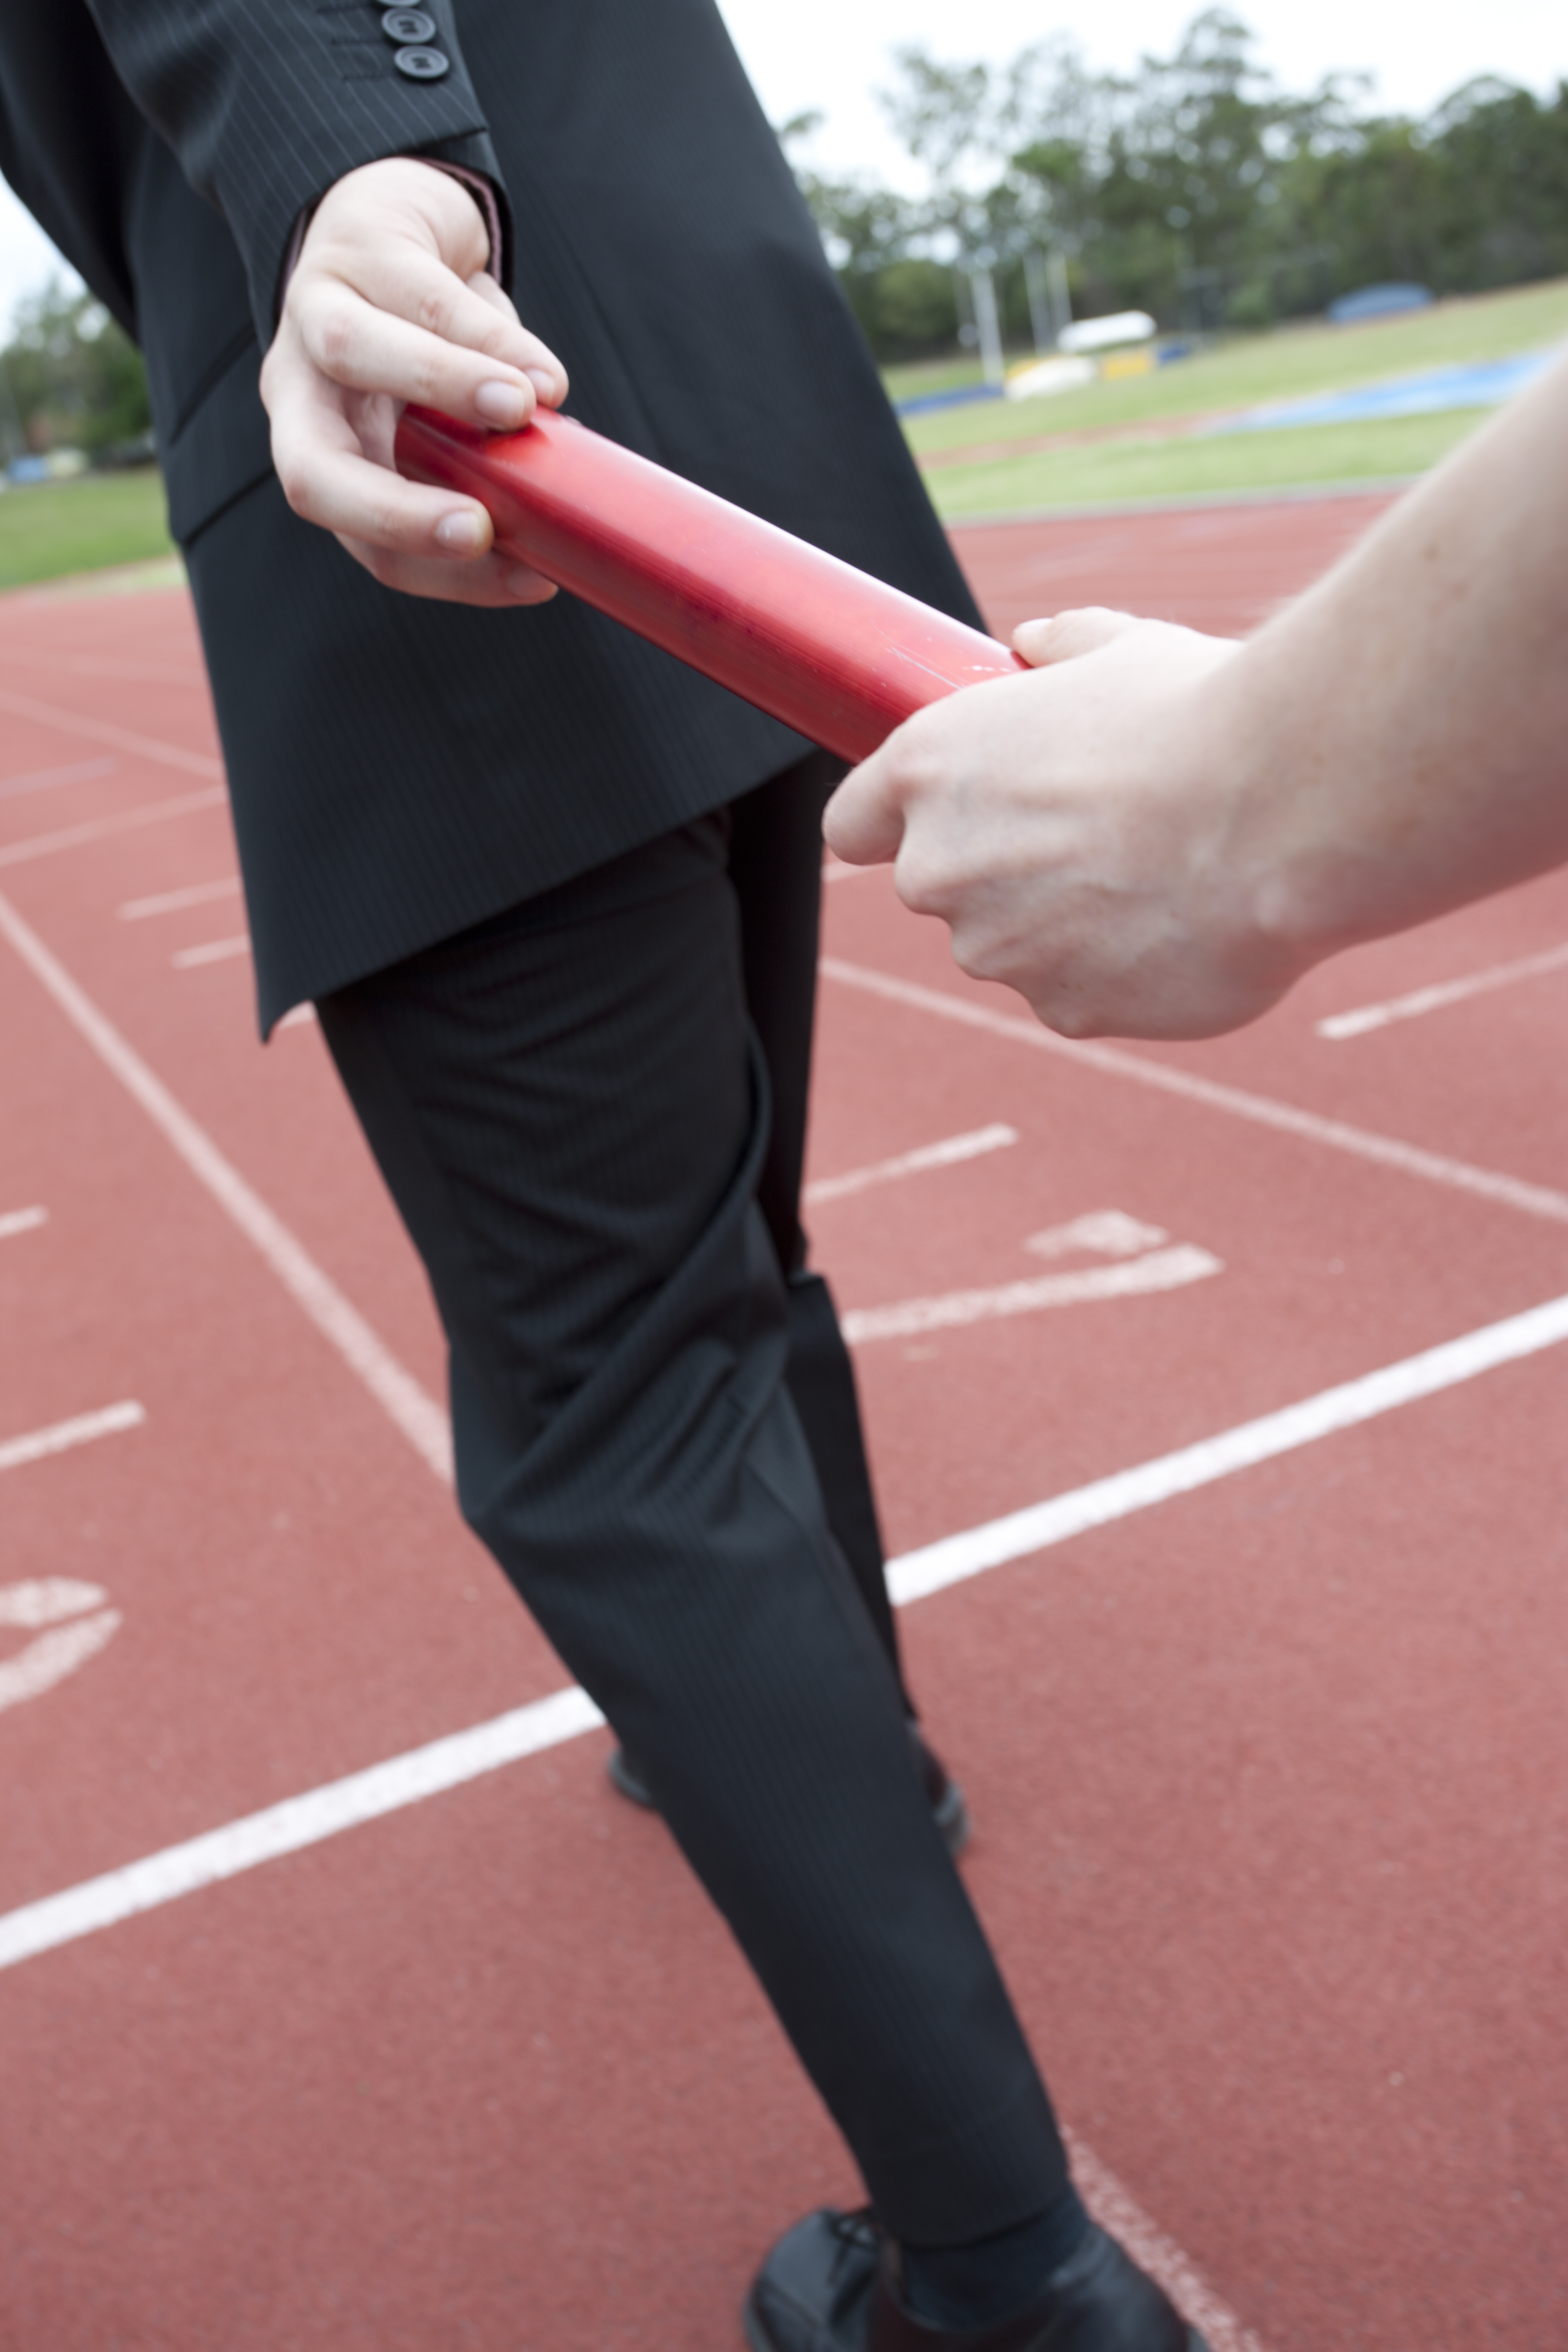 Runner passing a baton to a man in a business suit